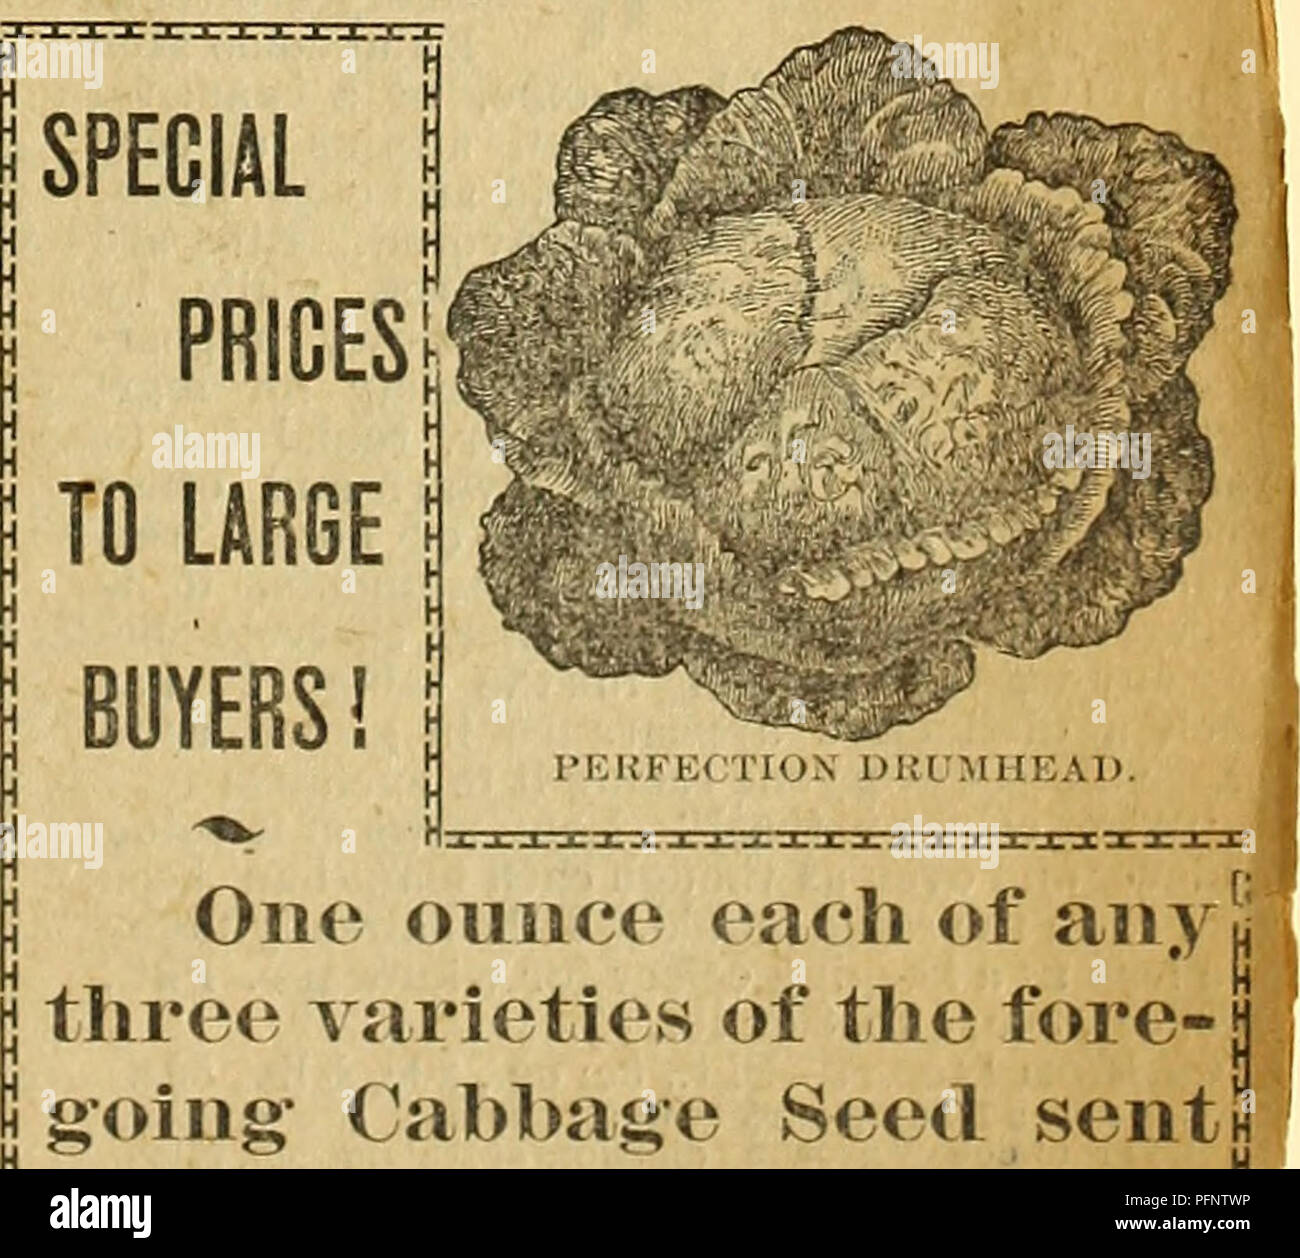 . Delano Bros.' seed catalogue of everything for the farm and vegetable garden for 1894. Nurseries (Horticulture) Nebraska Fairbury Catalogs; Vegetables Nebraska Catalogs; Plants, Ornamental Catalogs. EXCELSIOR LAliGE FLAT DUTCH. Stone Mason l&gt;rumhead—C haracterized by its sweetness and delicacy of flavor and by its relitij. bility in forming a large head. Very hardy and^' will endure the cold of extreme northern climates., Pkt., oc; oz., 15c; i lb., oOc; lb., $1.50. Mixed Cabbage Seed 10 cents an ounce. TO LARGE. SUREHEAD. BUYERS! oviiice each of any I j three varieties of the fore- { I j  Stock Photo